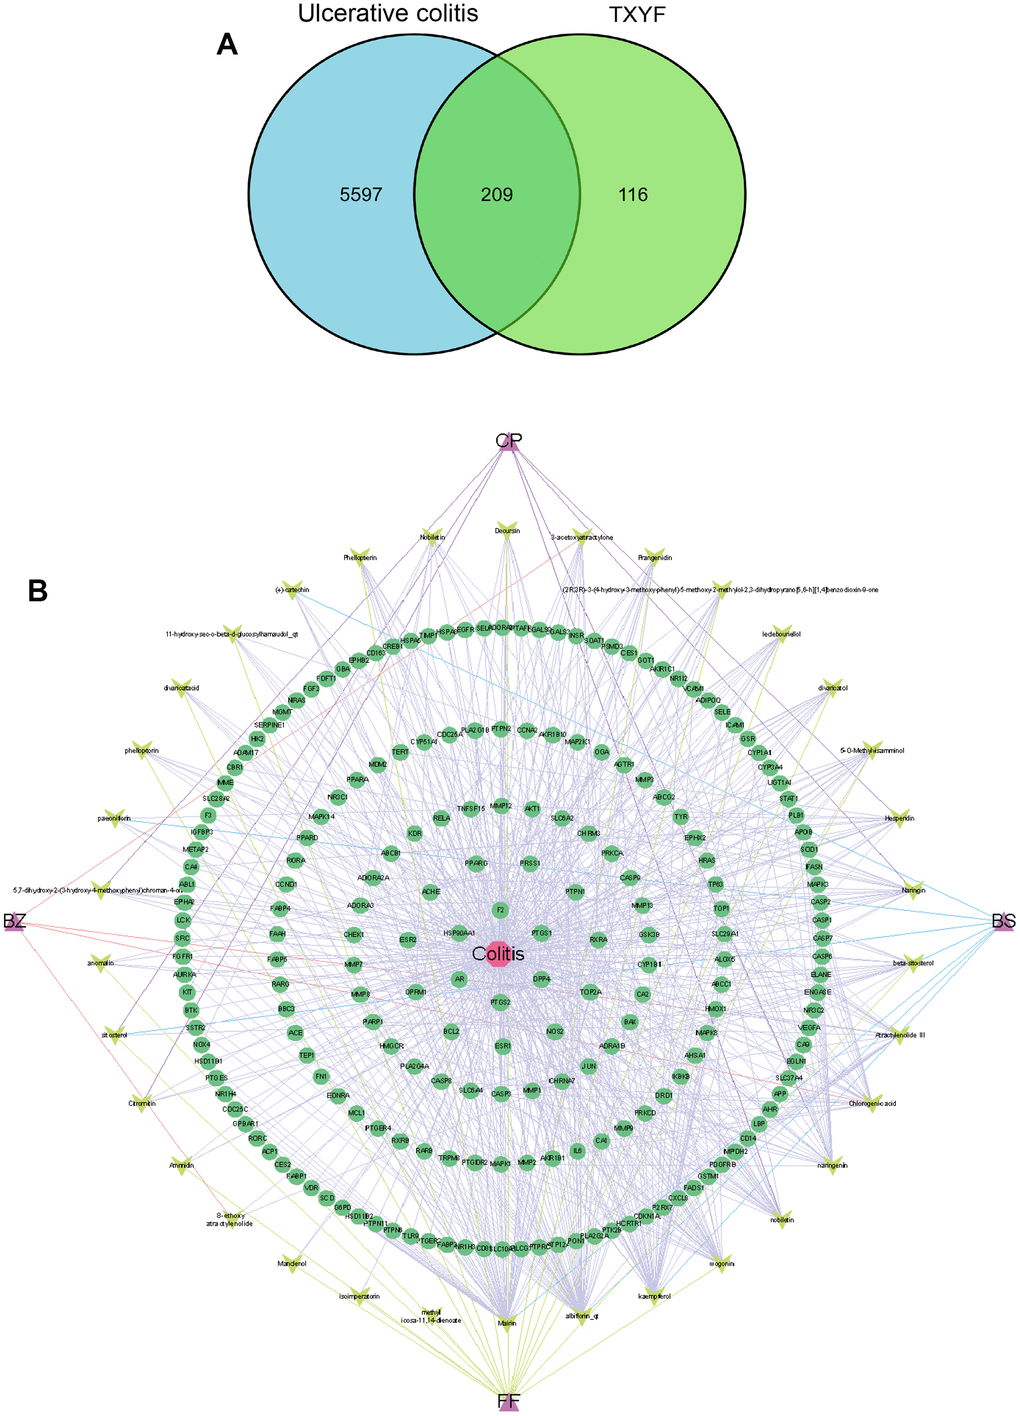 The network of active ingredient-effective target of TXYF in UC. (A) The Venn graph illustrated 209 common targets in-between 325 targets of TXYF and 5806 UC-related targets. (B) The network of active ingredient-effective target of TXYF in UC. Tongxie-Yaofang formula (TXYF).